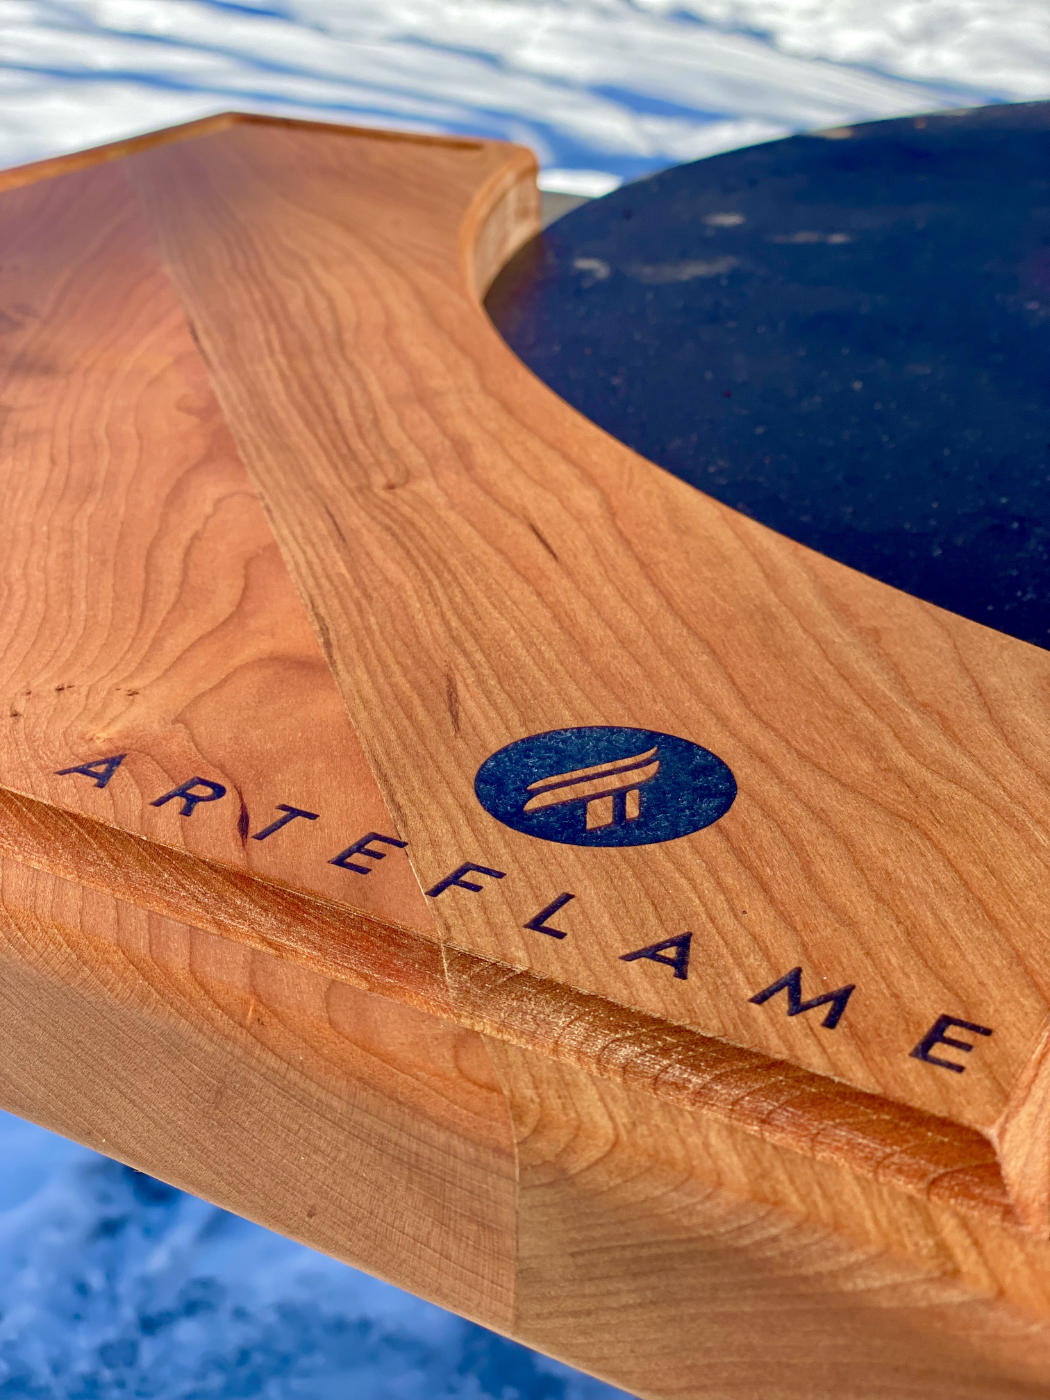 Arteflame Cherry Wood Cutting Block on Grill